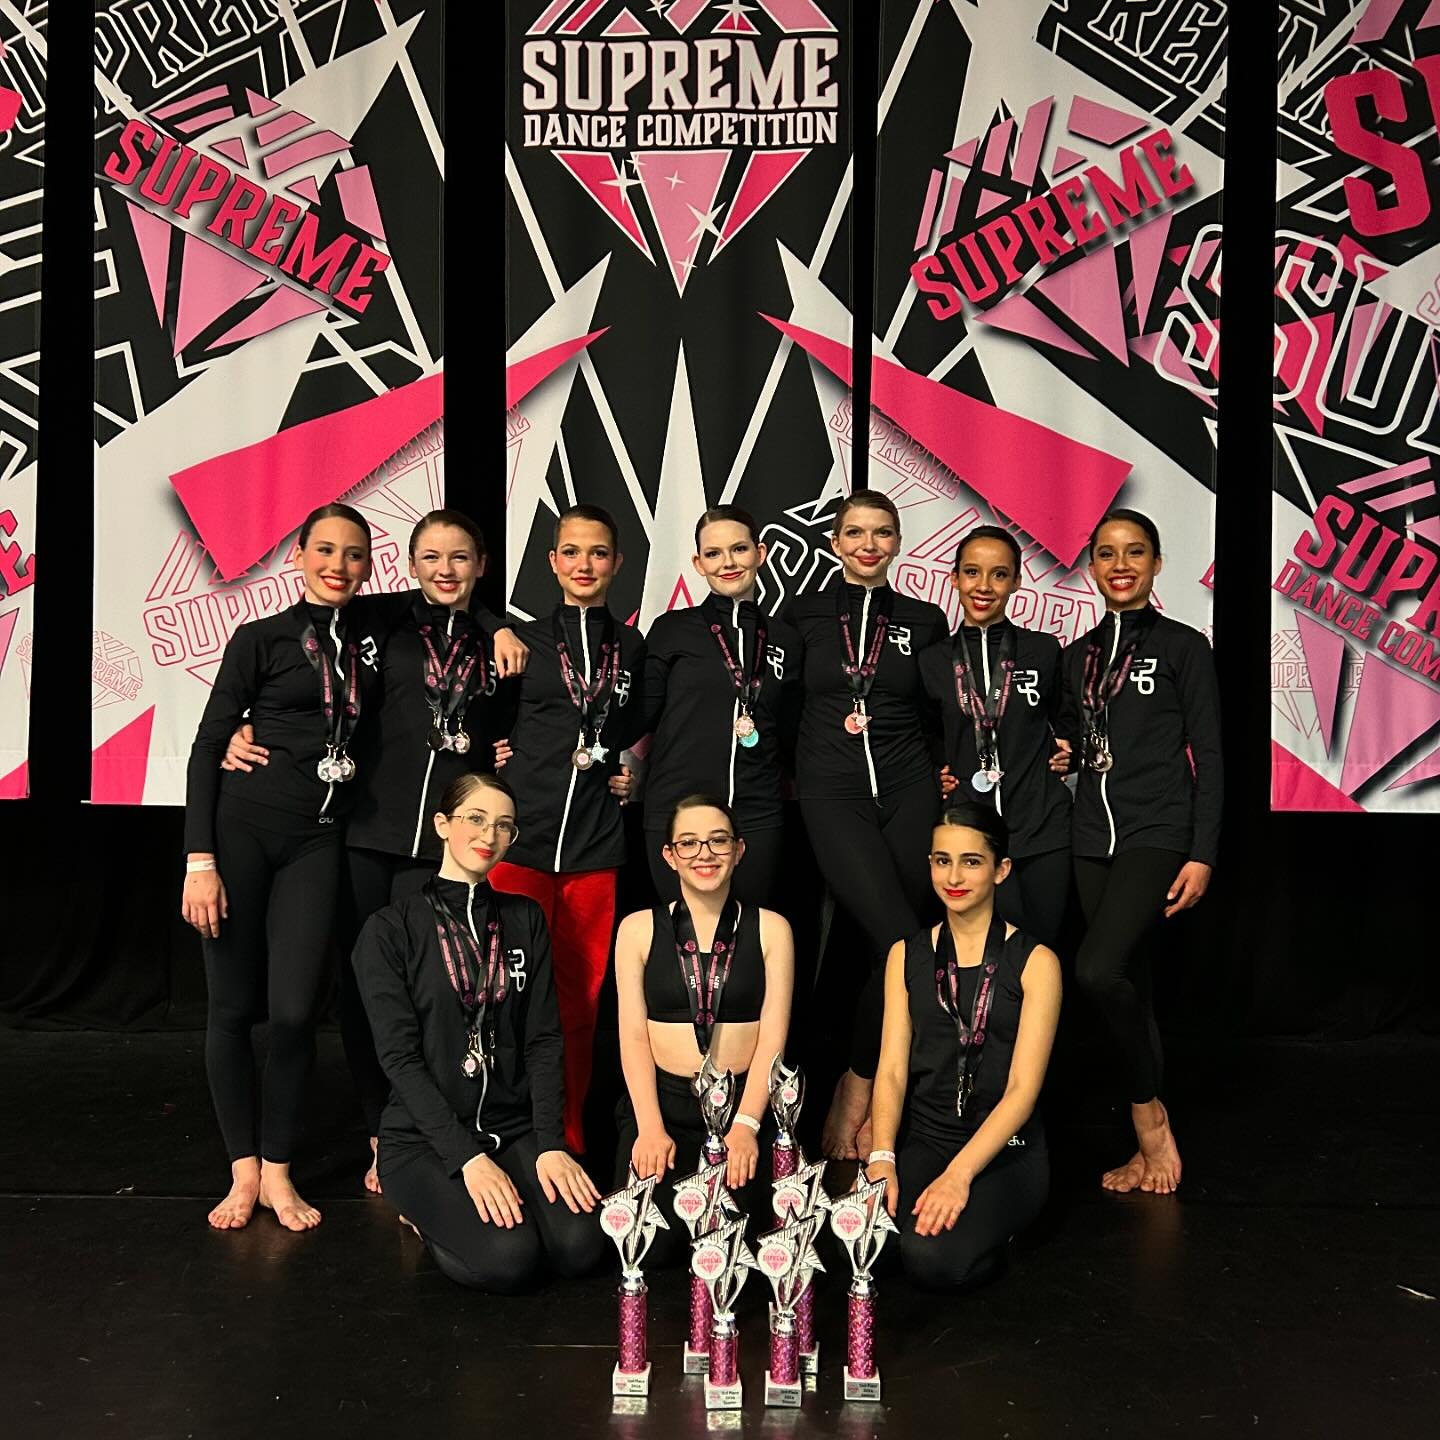 We are incredibly proud of our C&amp;P Team and are finally able to say a big yay at the fact that we had our entire team together (swipe) 

Competing @supremedancecomp this past Sunday has left us on an absolute high for this week! 

Congratulations